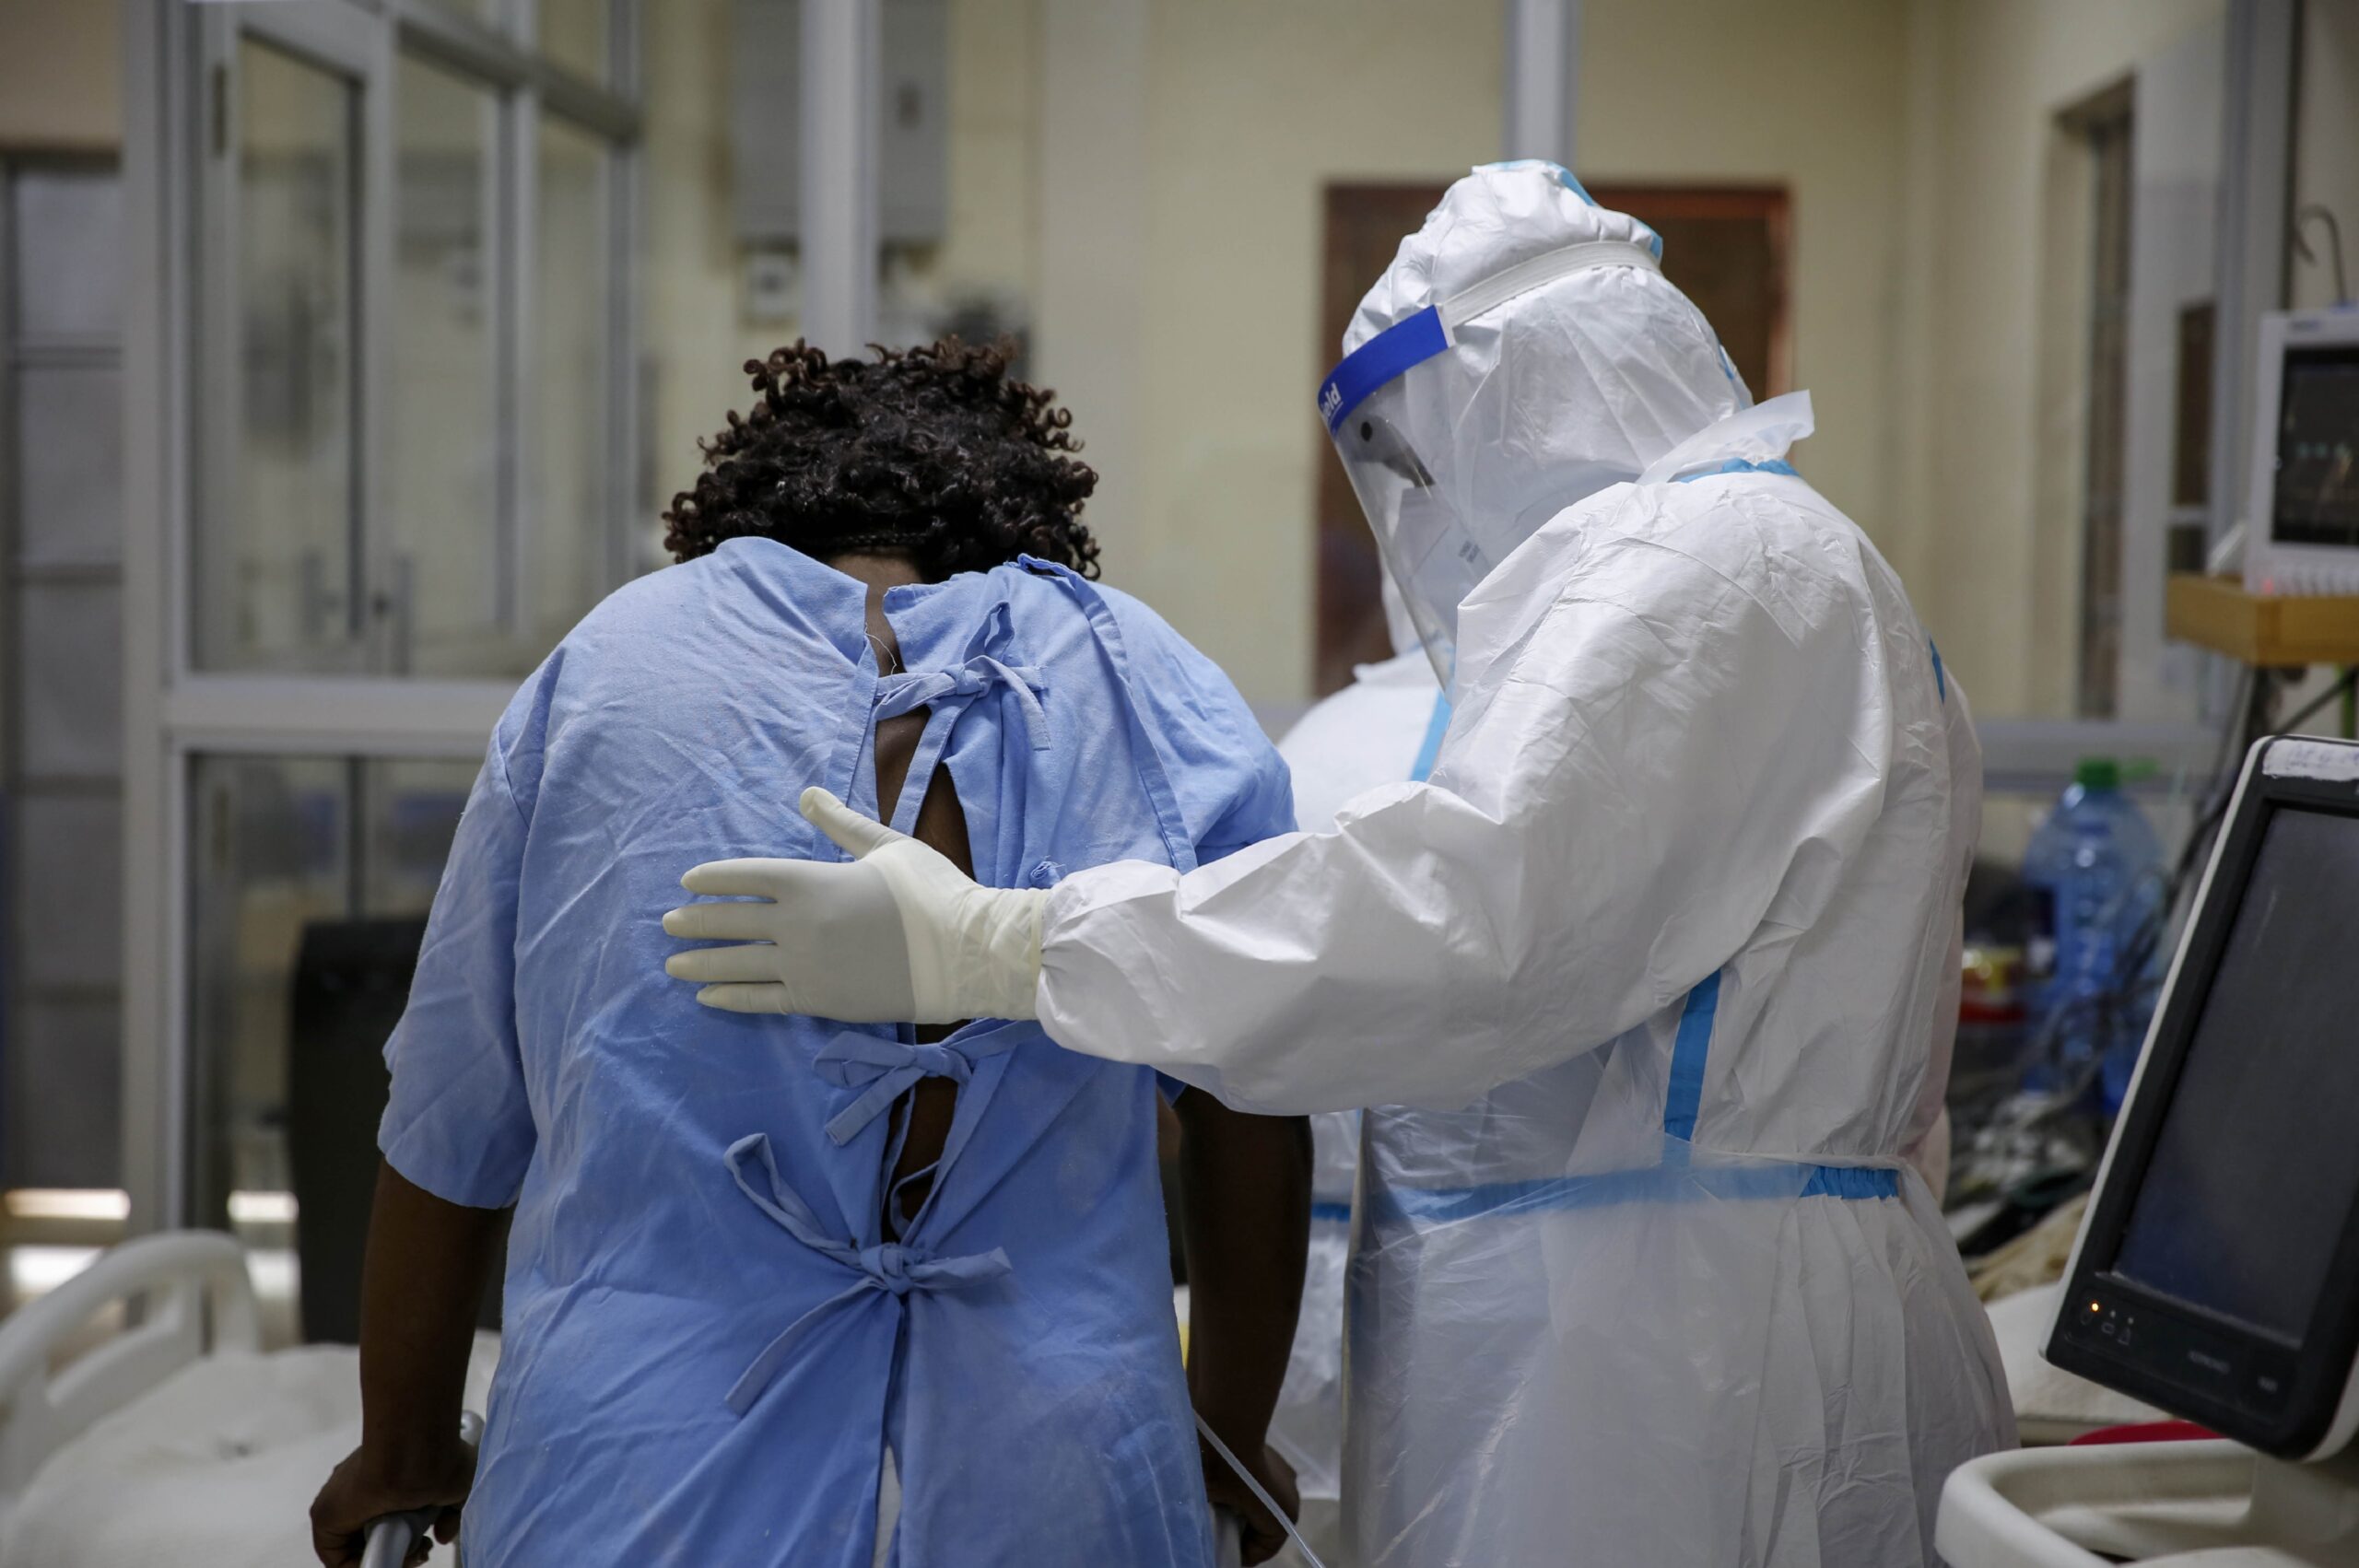 A medical worker attends to a coronavirus patient in the intensive care unit